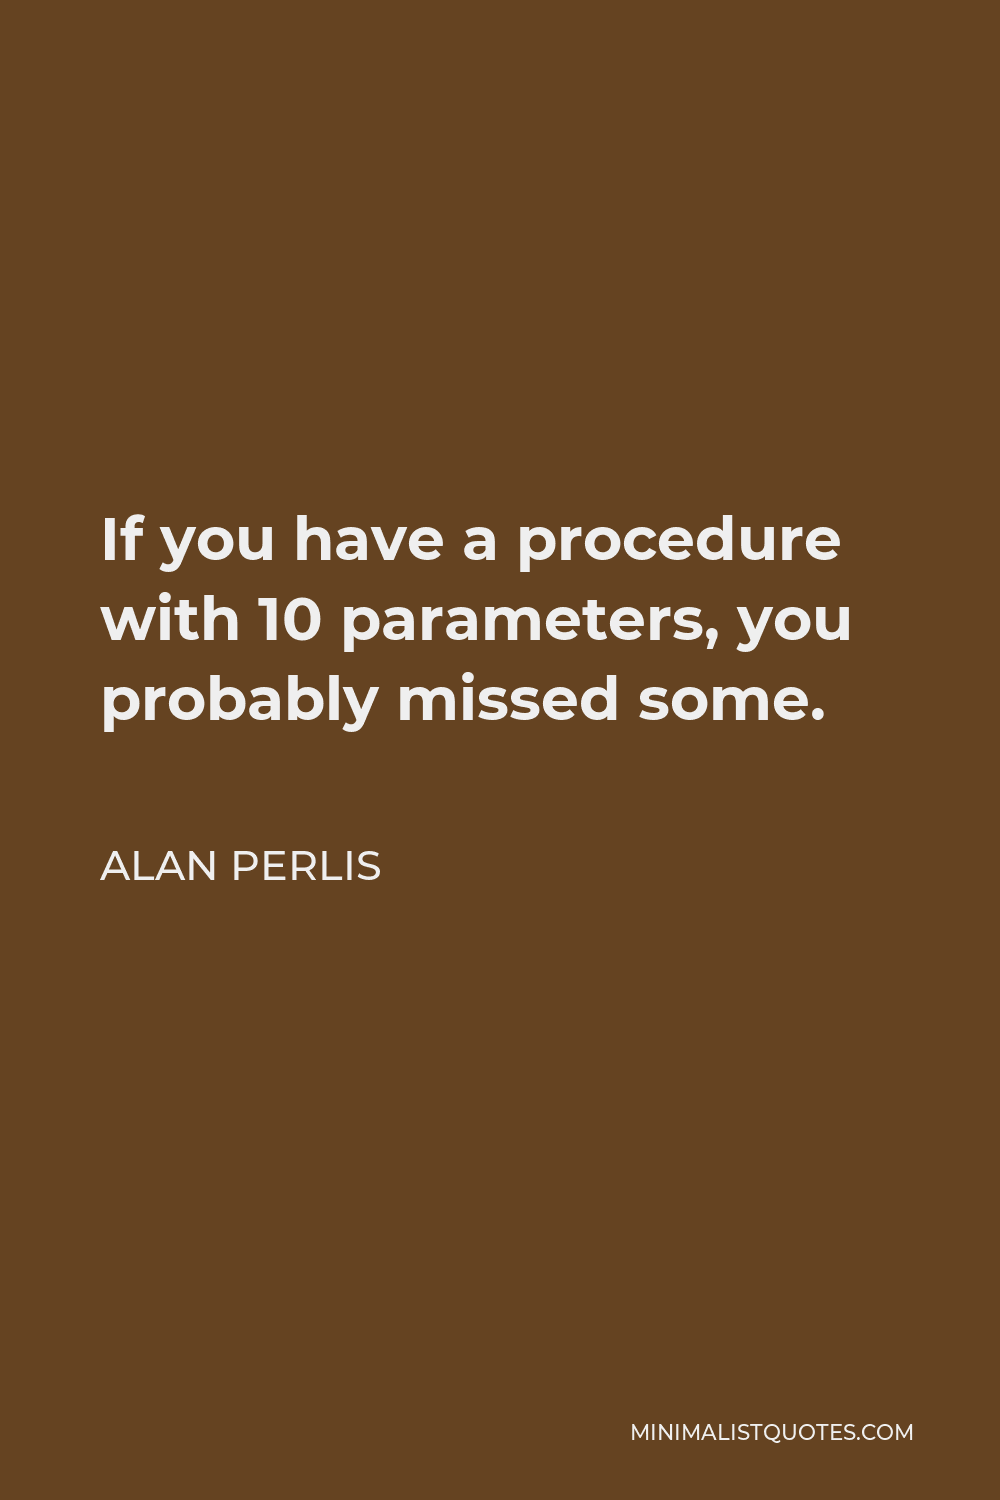 Alan Perlis Quote - If you have a procedure with 10 parameters, you probably missed some.